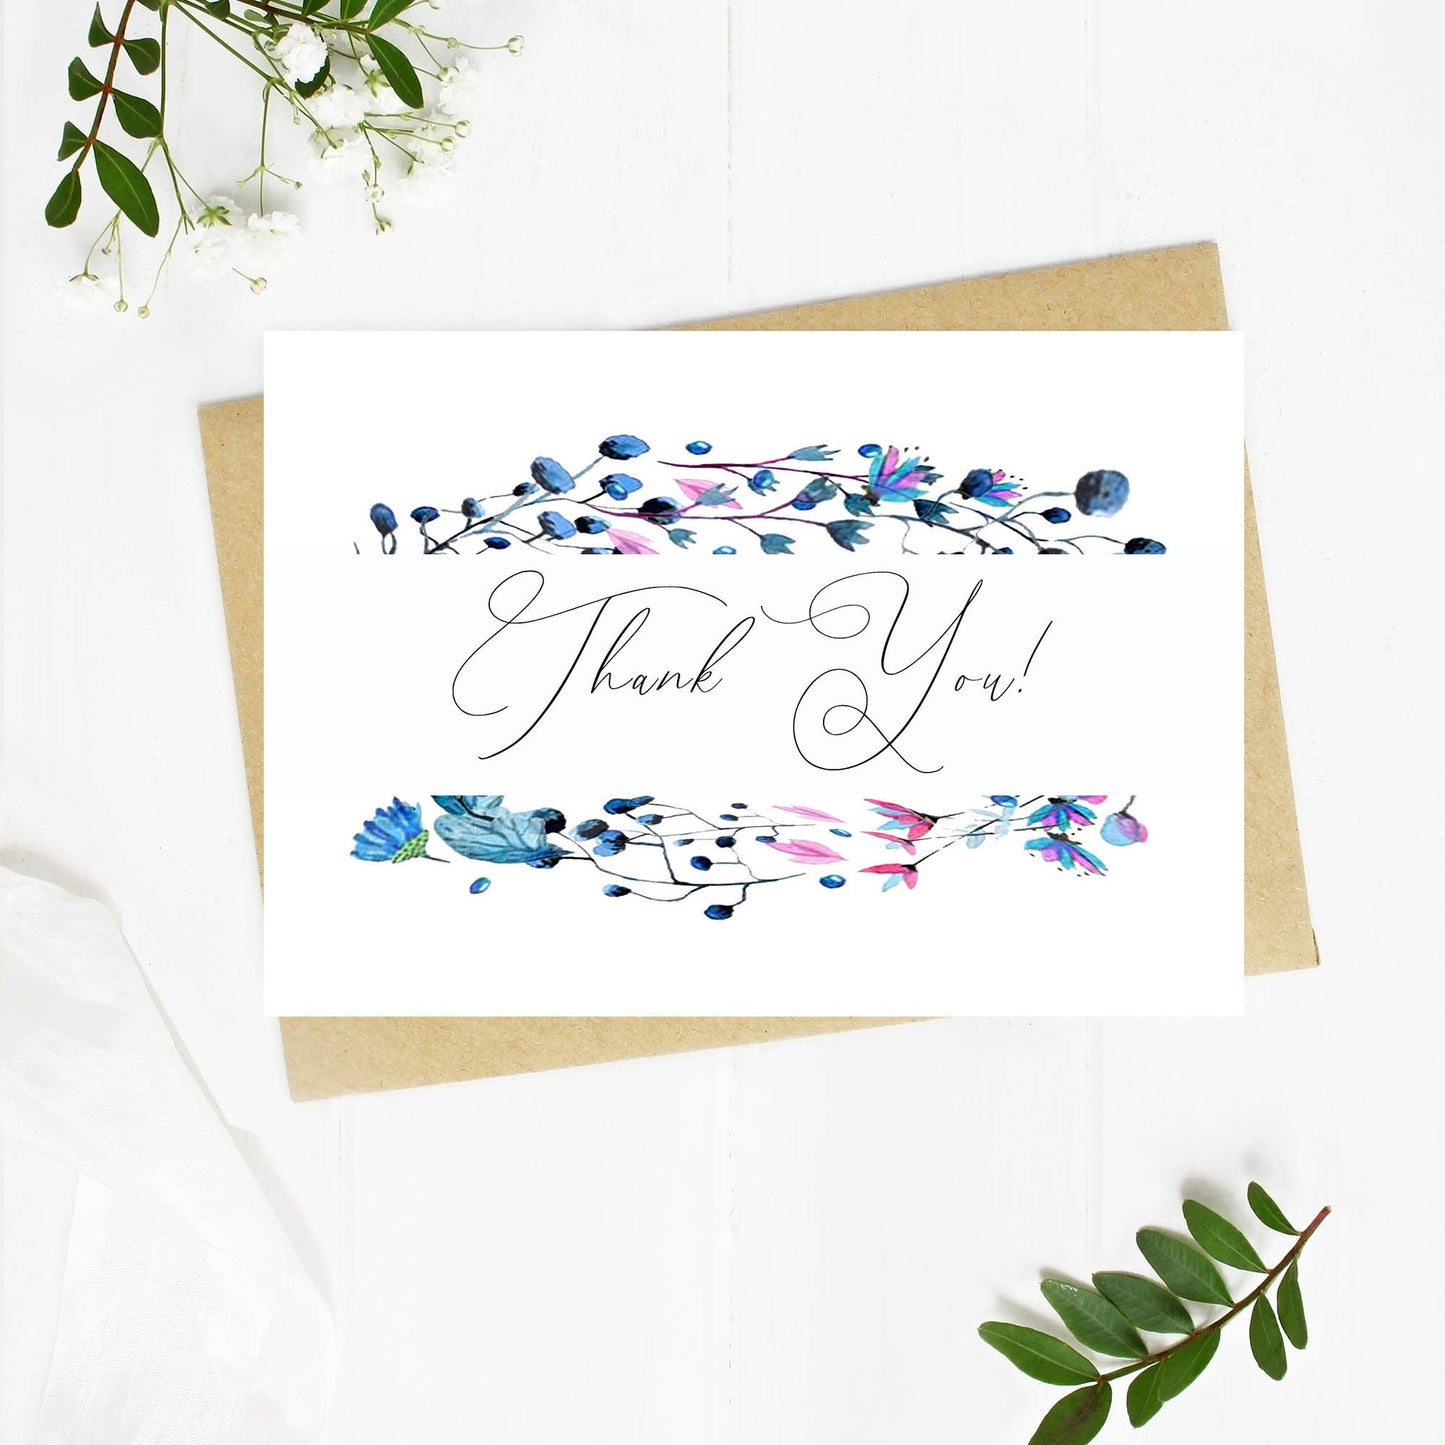 Thank you card set, Blank thanks, Graduation 2020 cards, Folded college grad thank you -MCS0011C